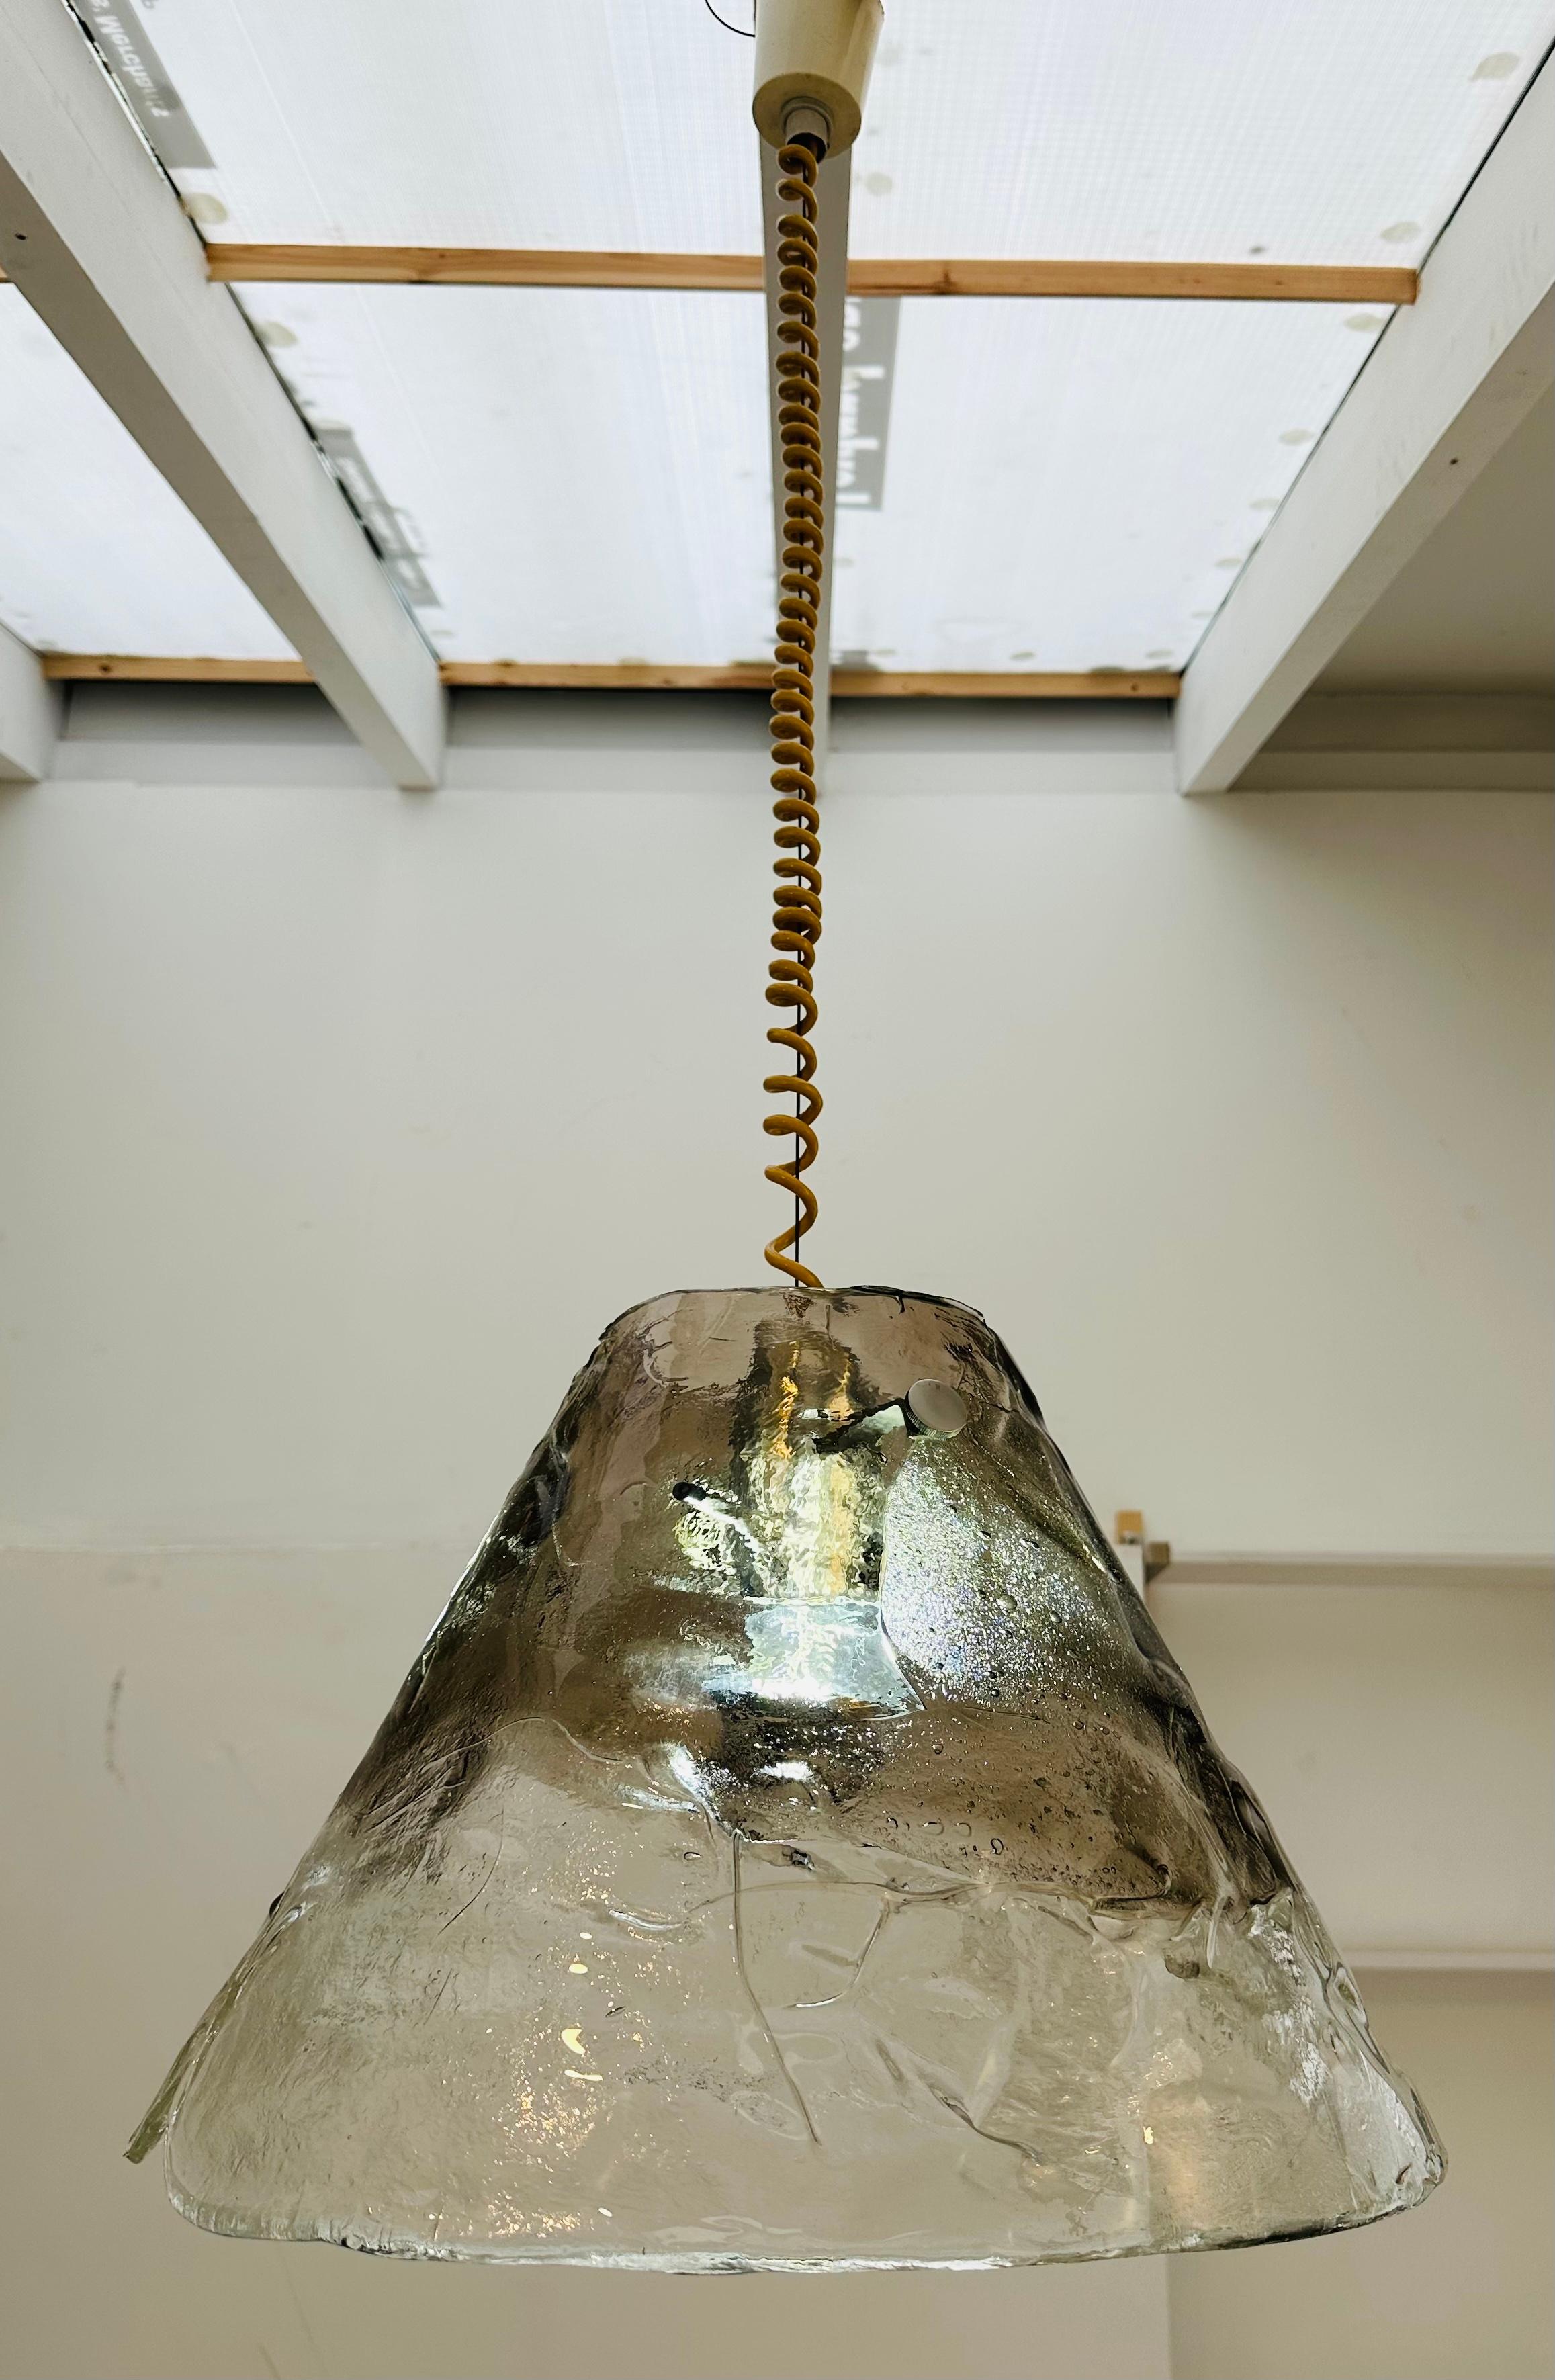 An absolutely stunning mid century 1960s smoked and clear glass hanging pendant light designed by J.T. Kalmar for Franken KG.  Manufactured in Germany.  The shade is formed with two pieces of heavy textured Murano glass which are a smoked brown